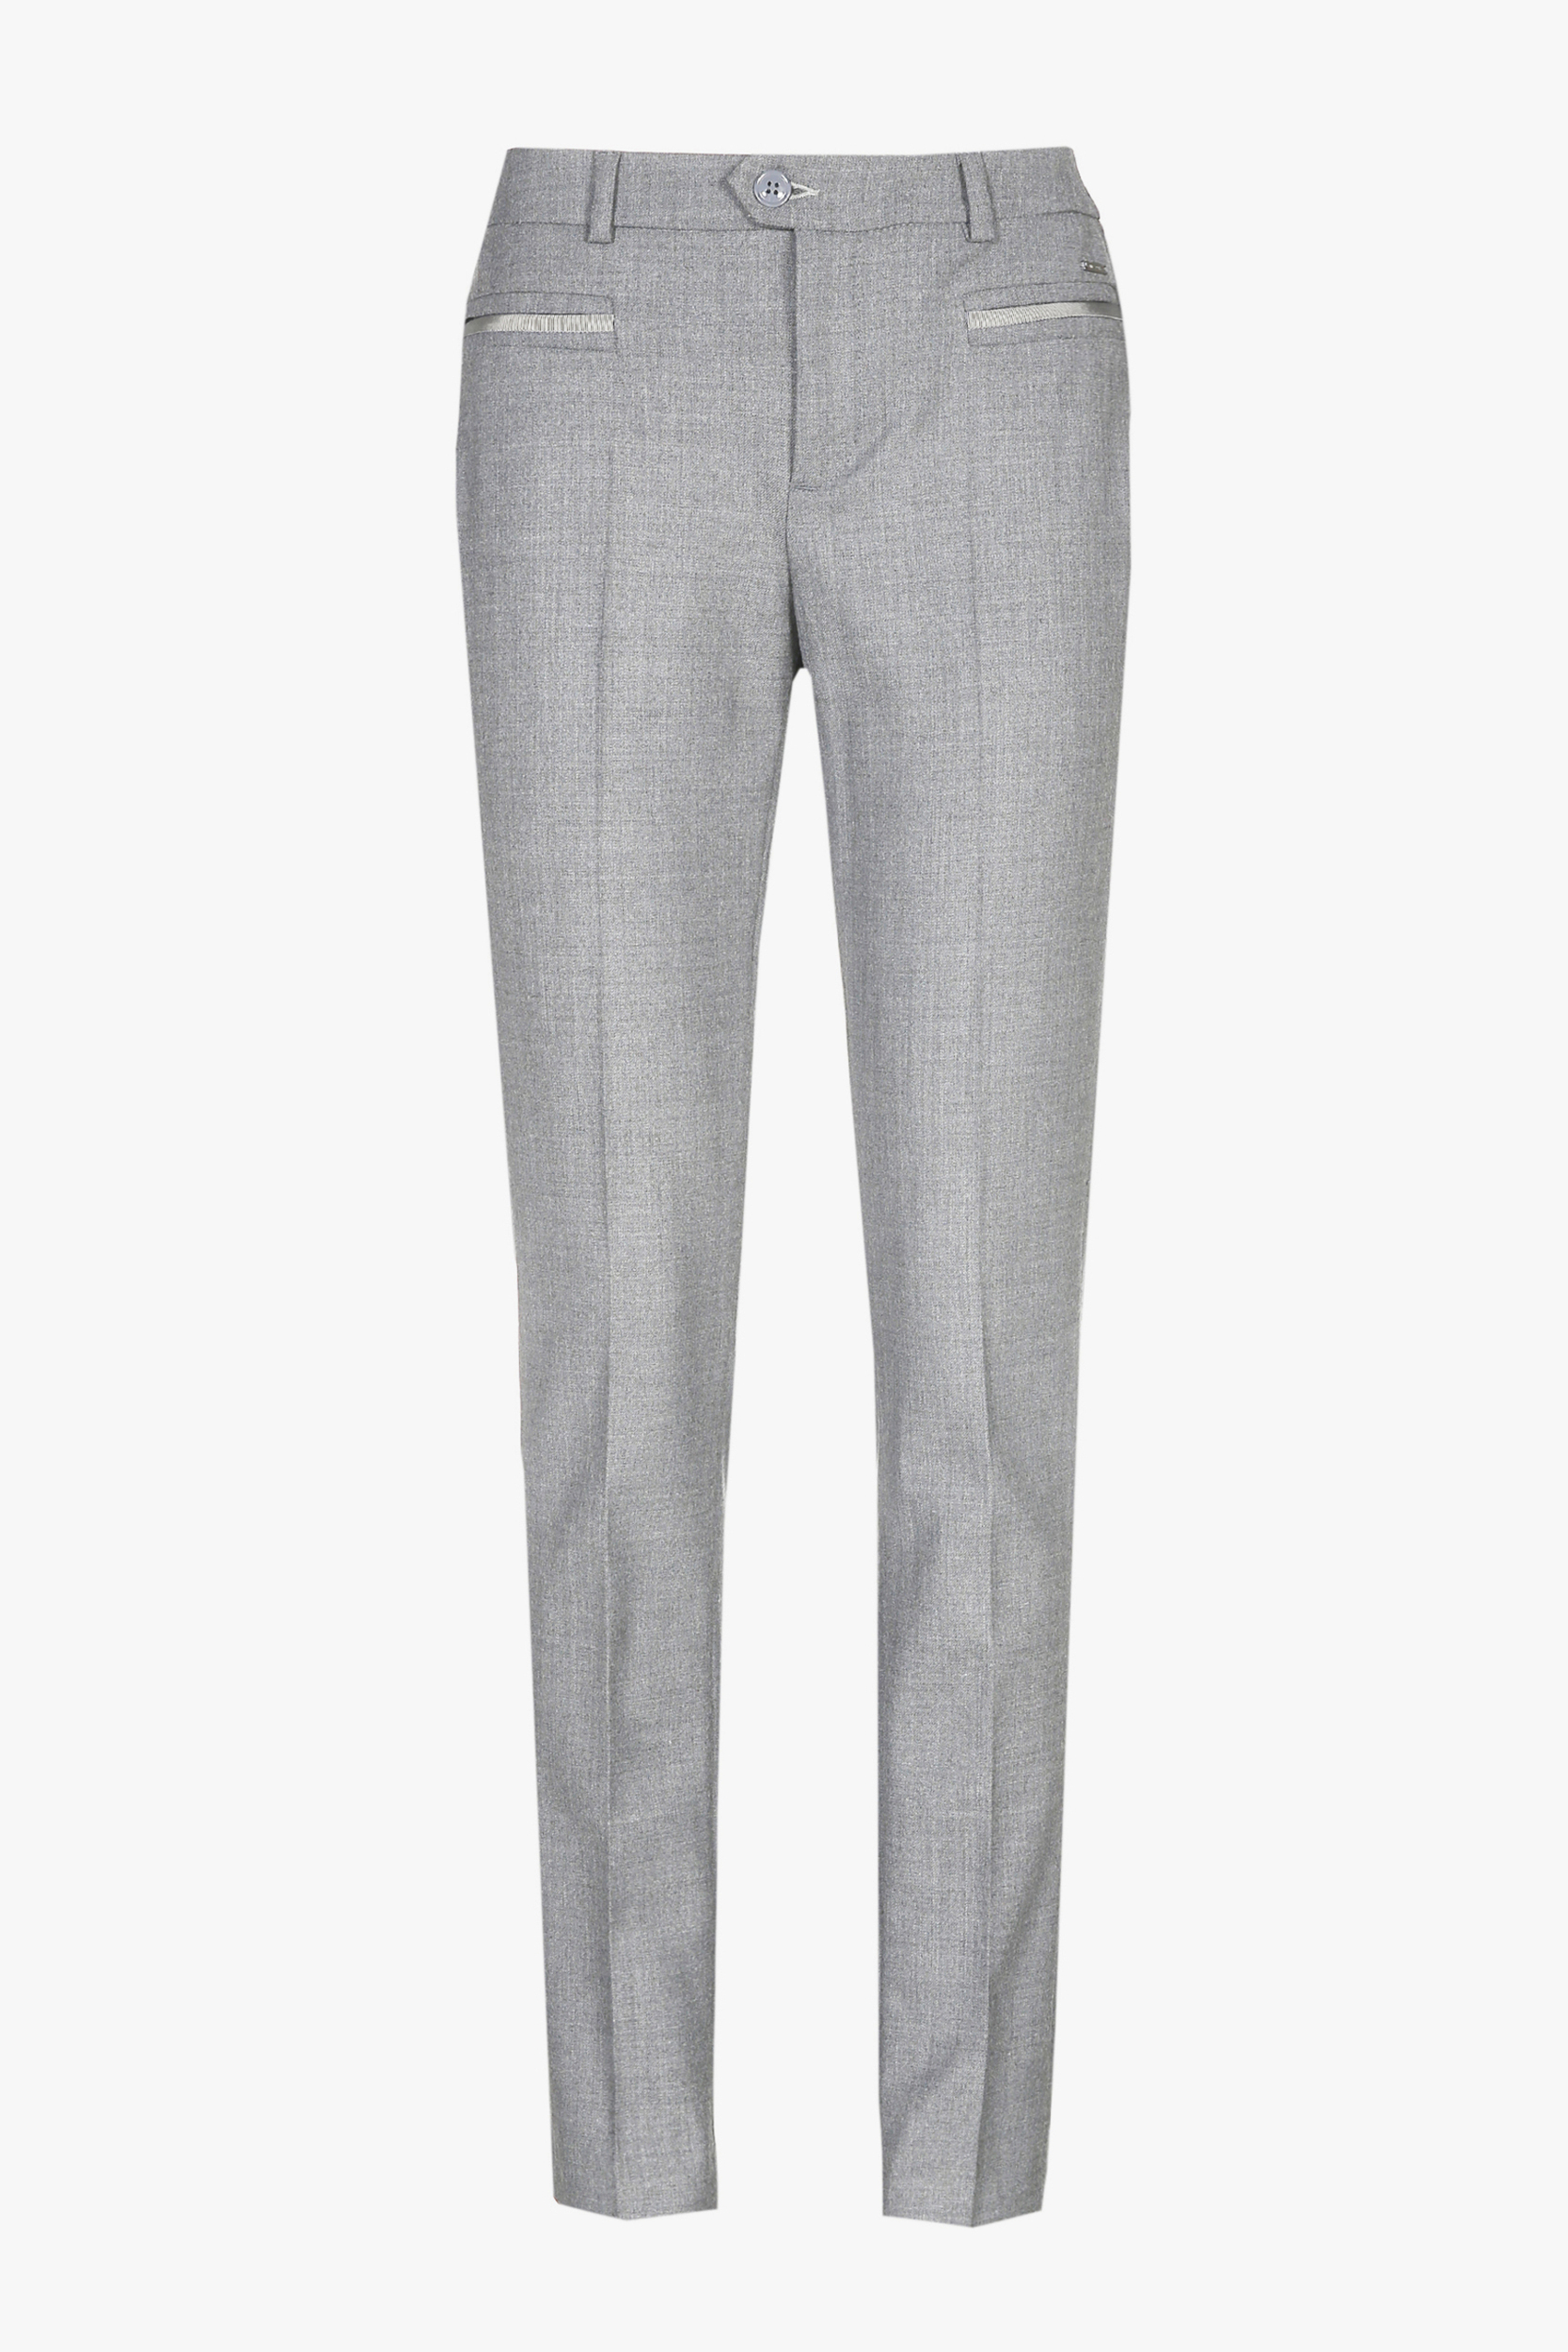 Smart light-grey woollen trousers with a slim fit